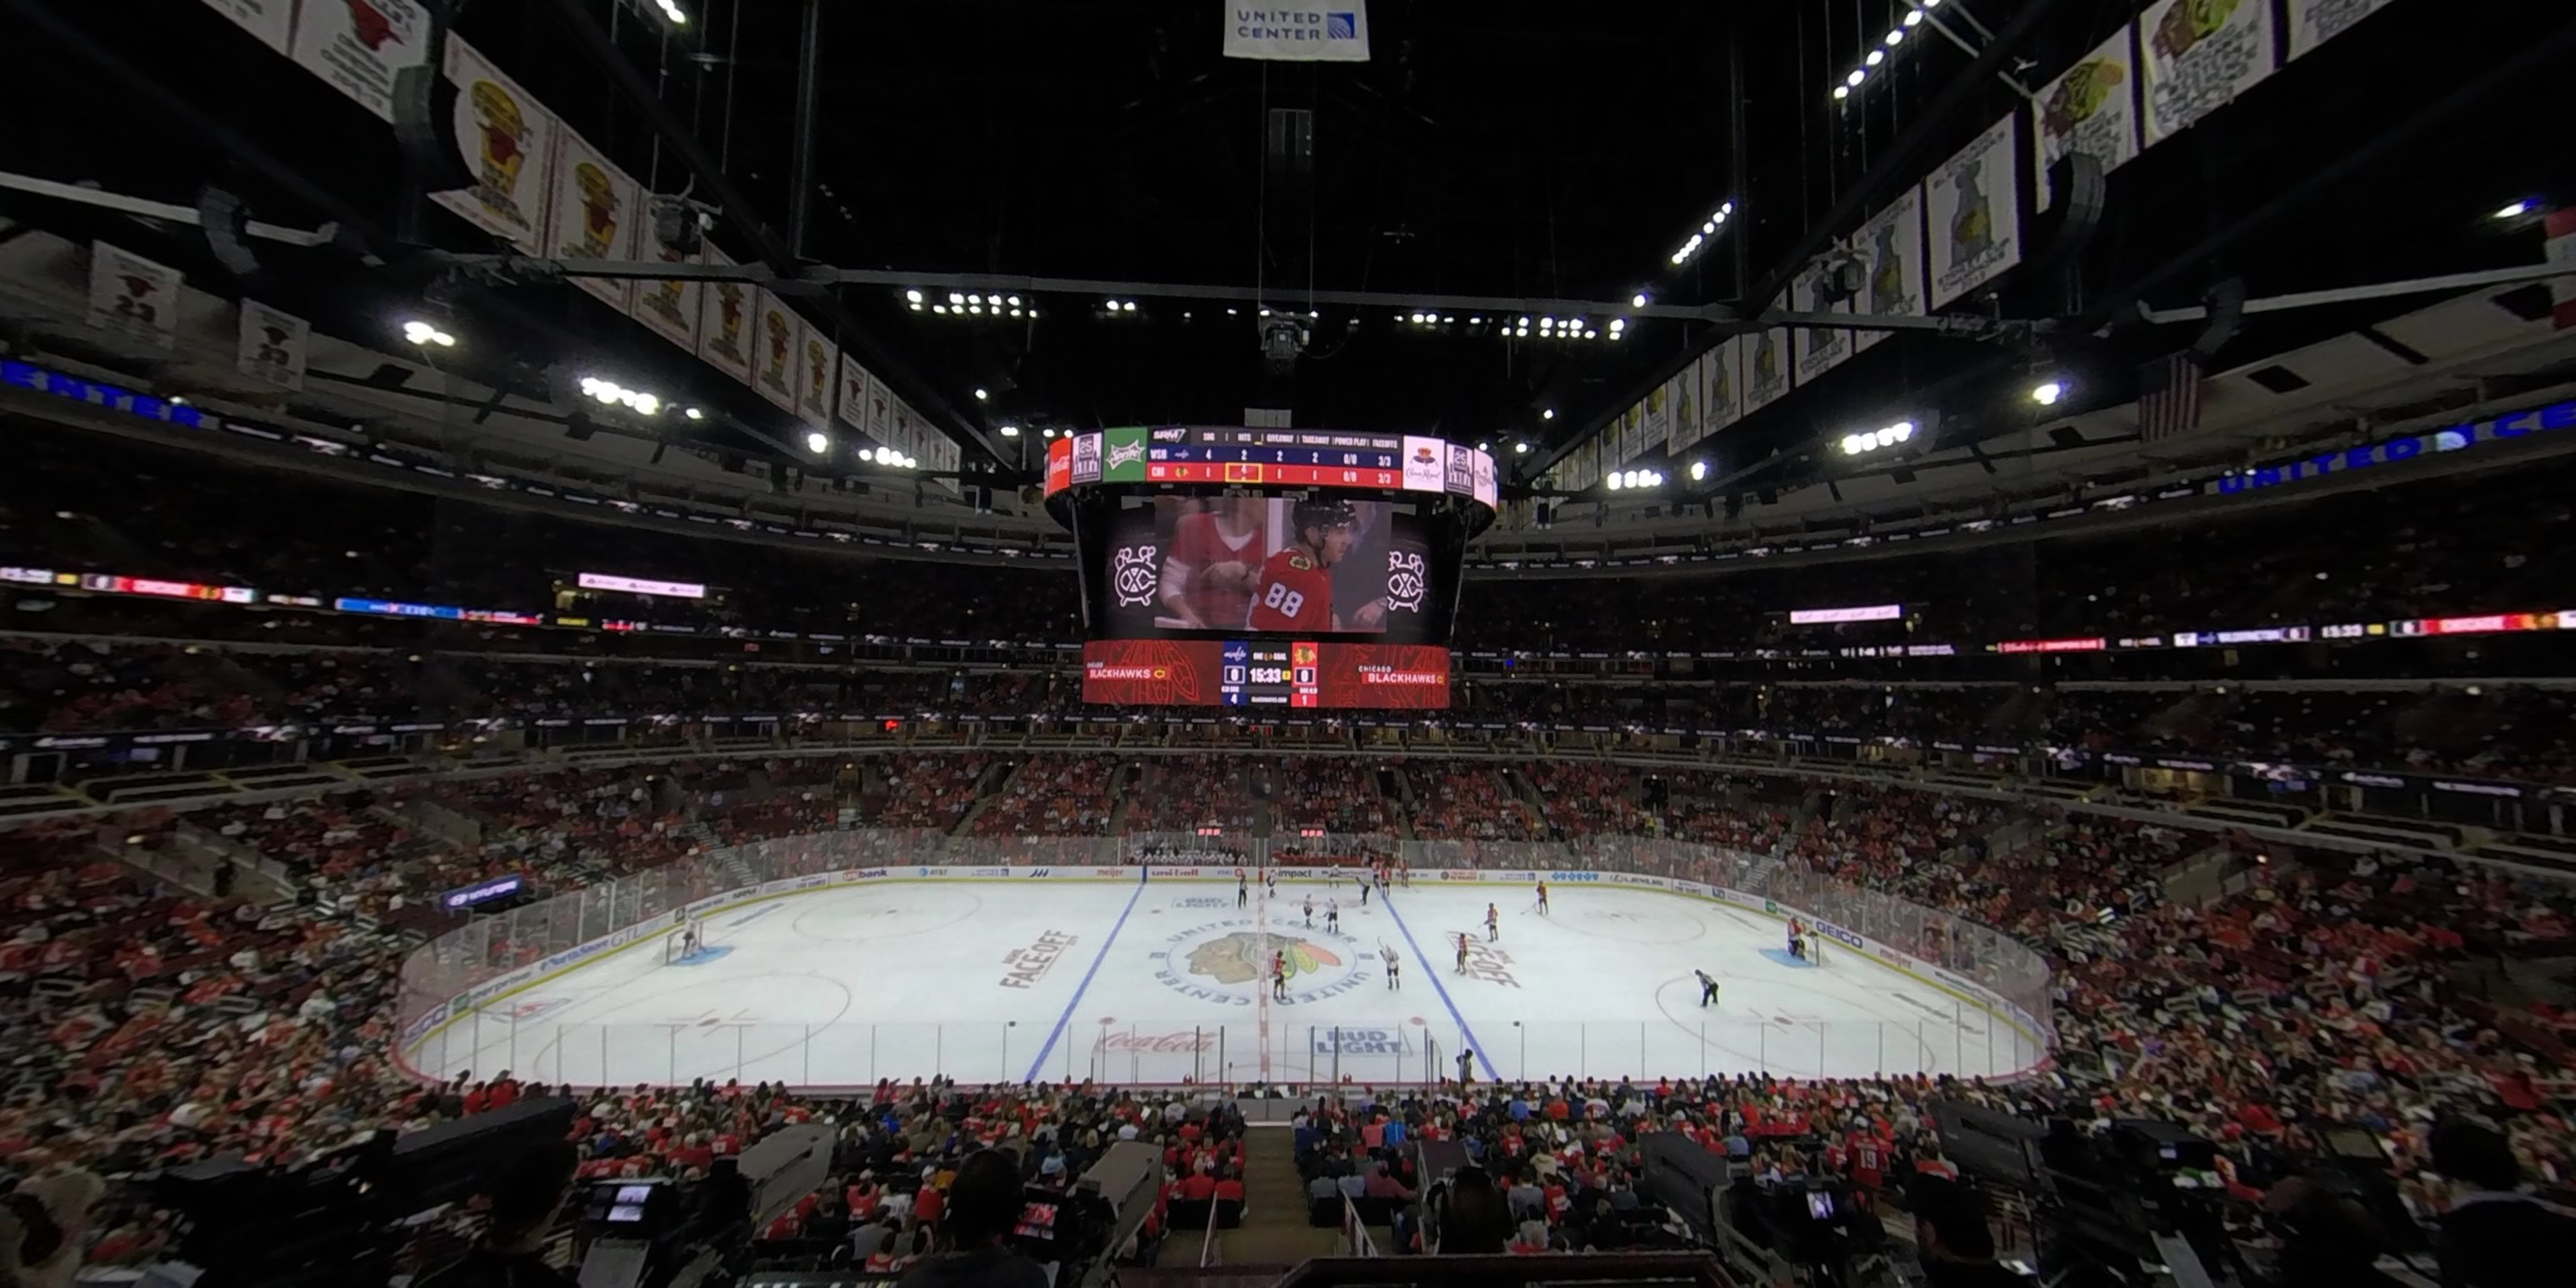 section 217 panoramic seat view  for hockey - united center